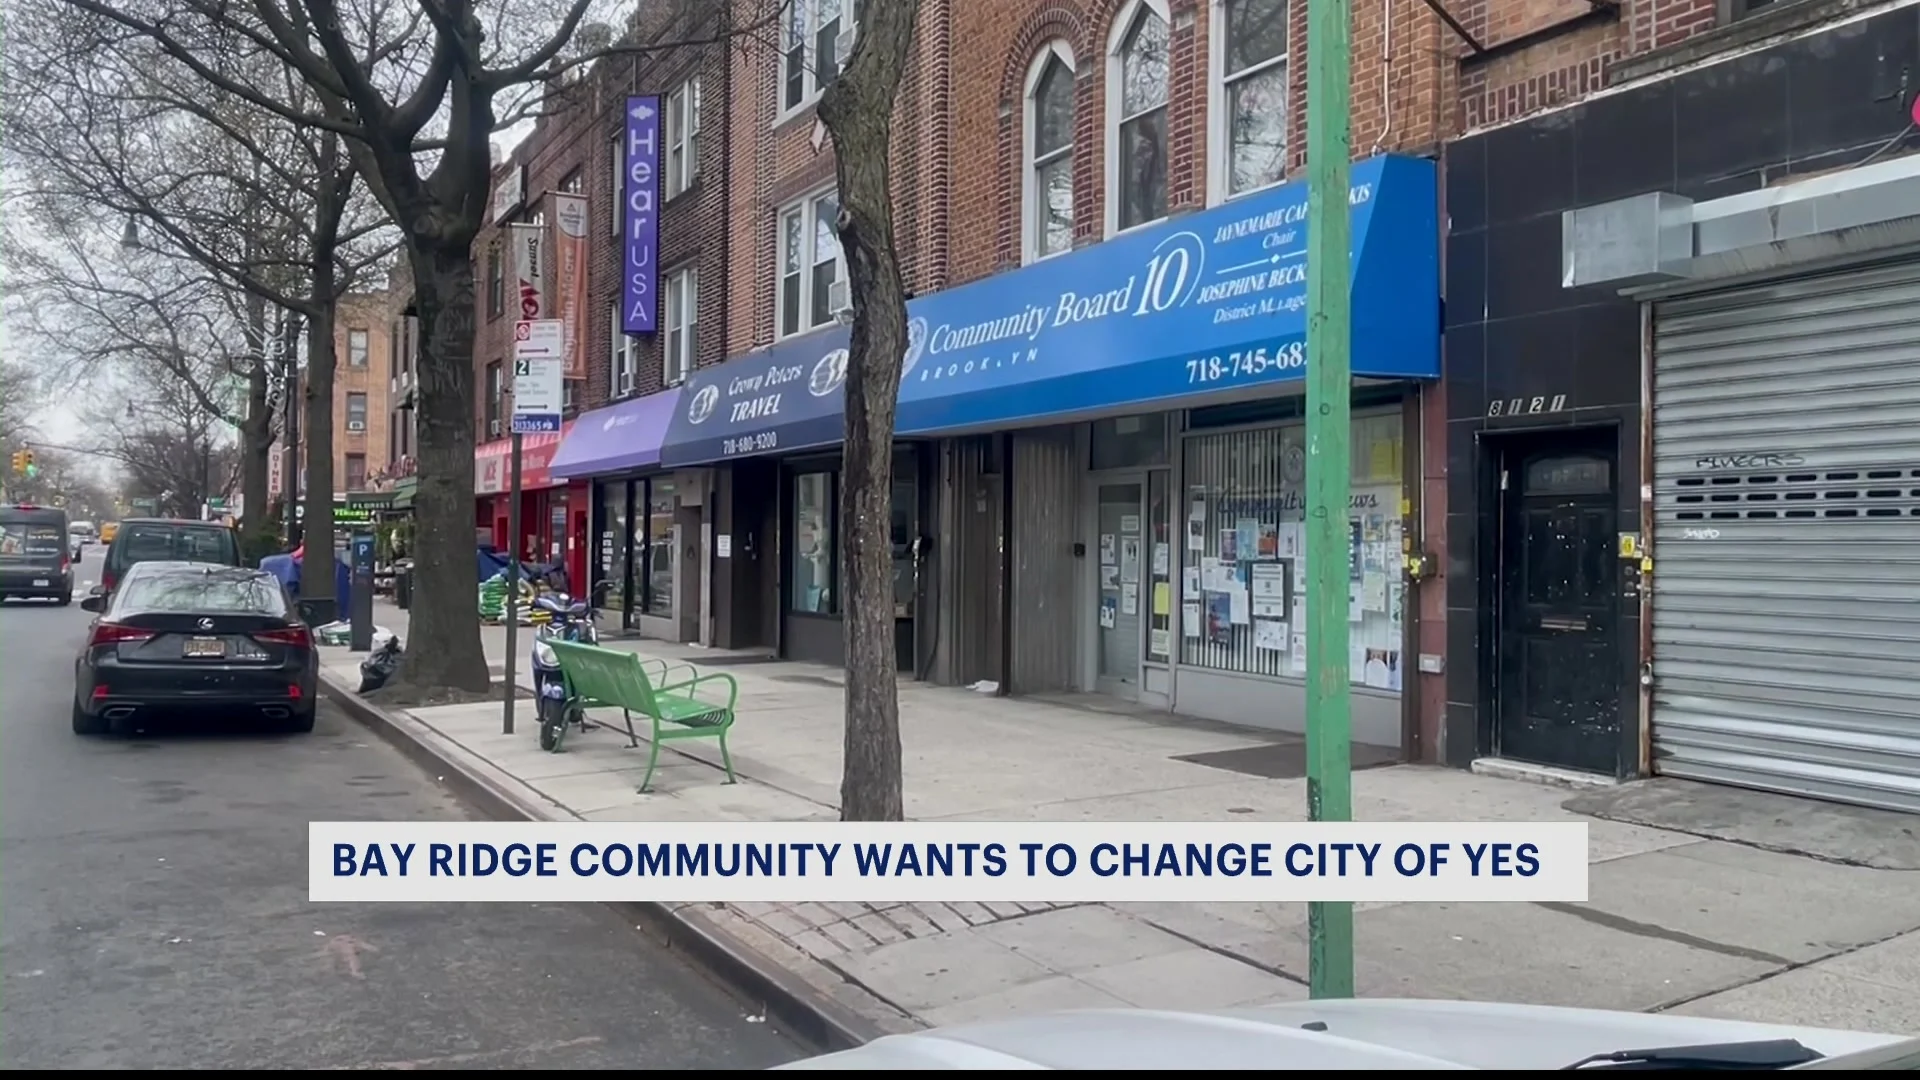 Bay Ridge business owners and community board give mixed reviews on ‘City of Yes’ plan